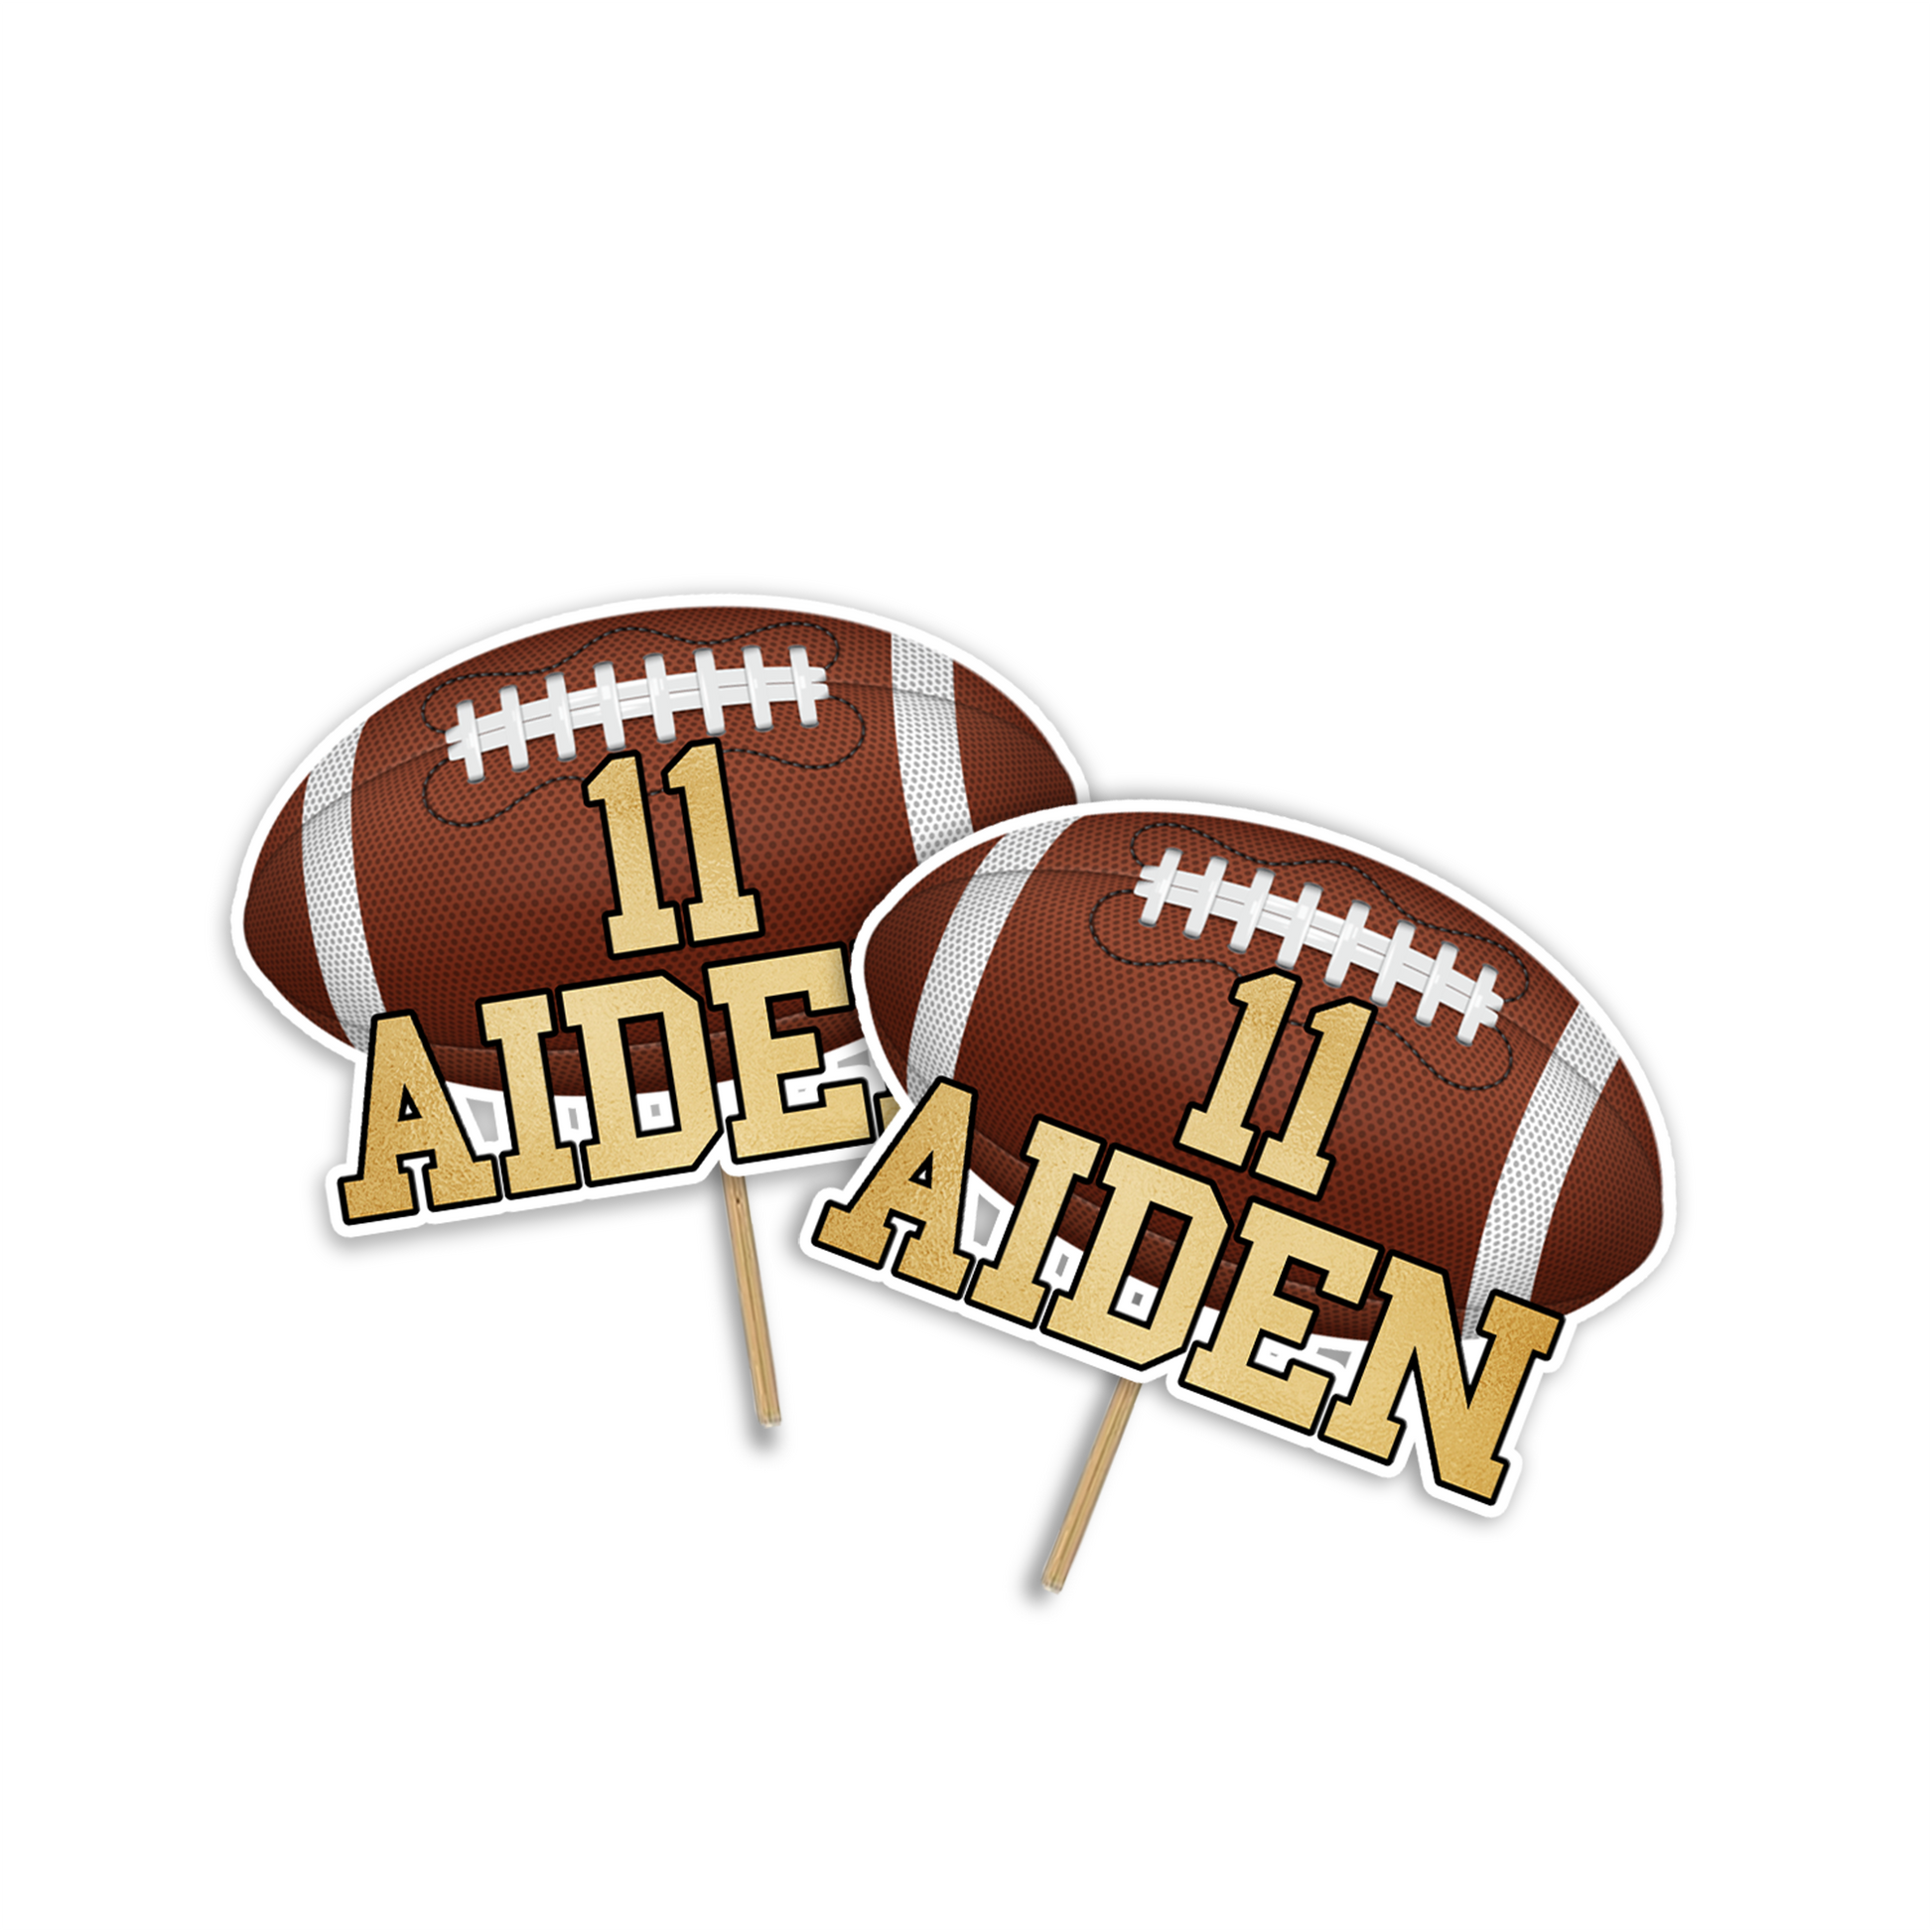 Personalized cake toppers with a Football theme